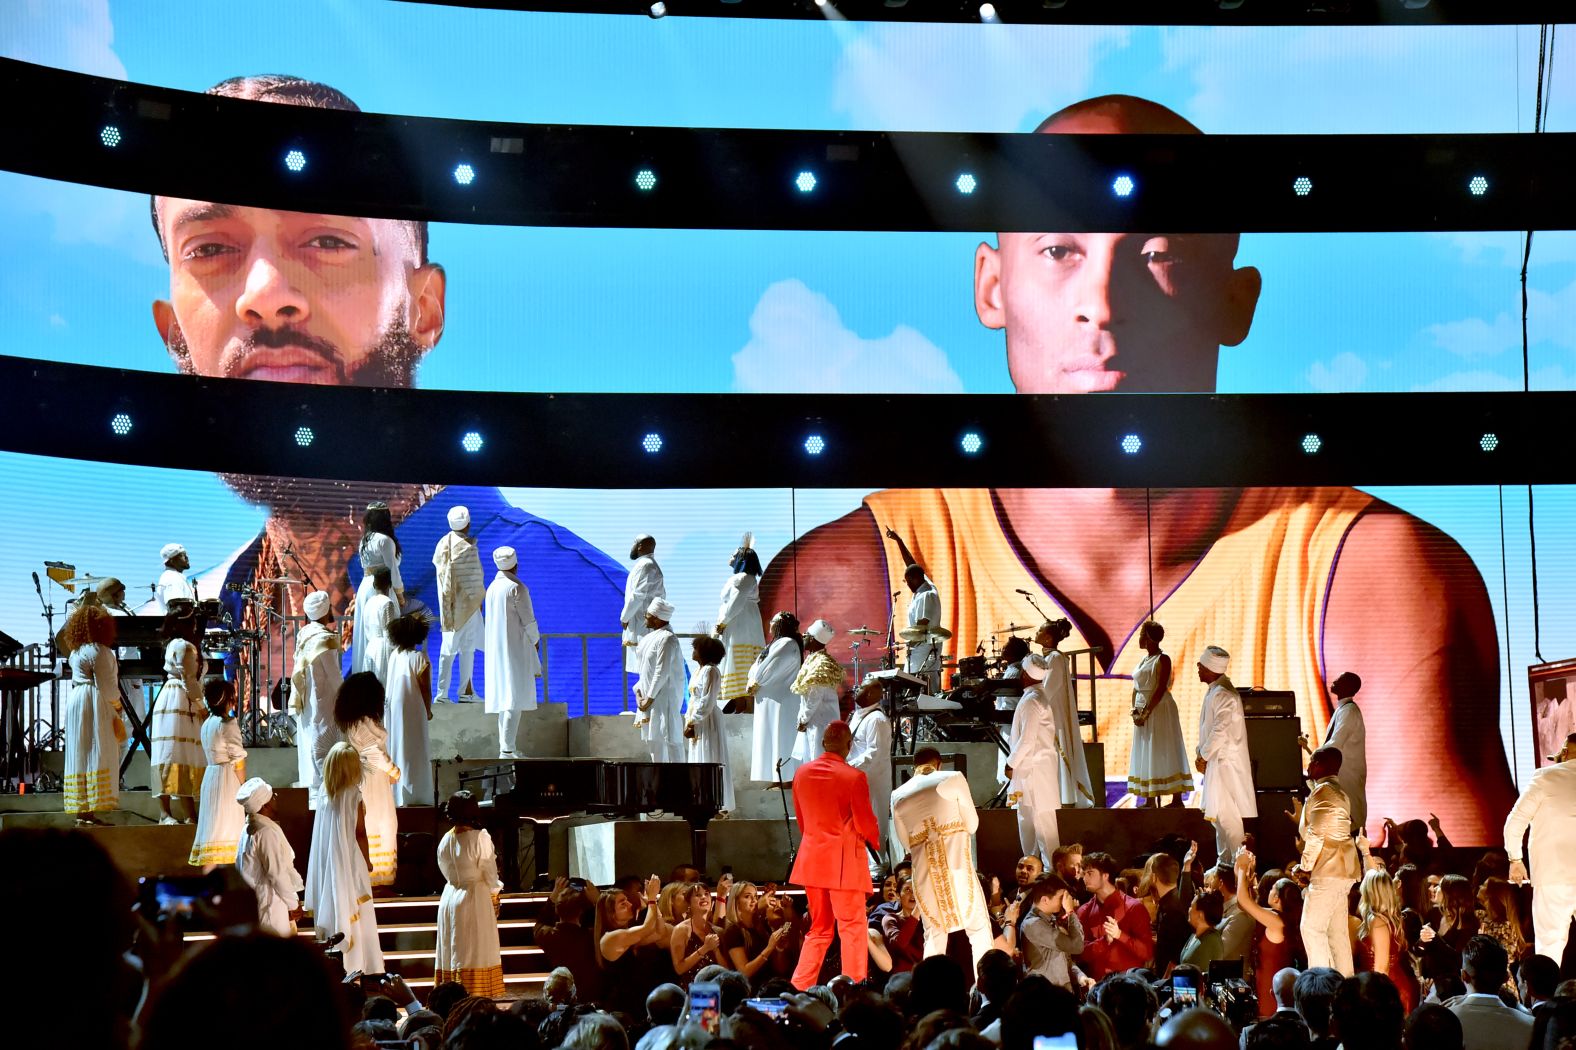 John Legend, YG, and DJ Khaled performed a medley of Nipsey Hussle songs alongside Meek Mill, Roddy Ricch and Kirk Franklin as a tribute to the late rapper.